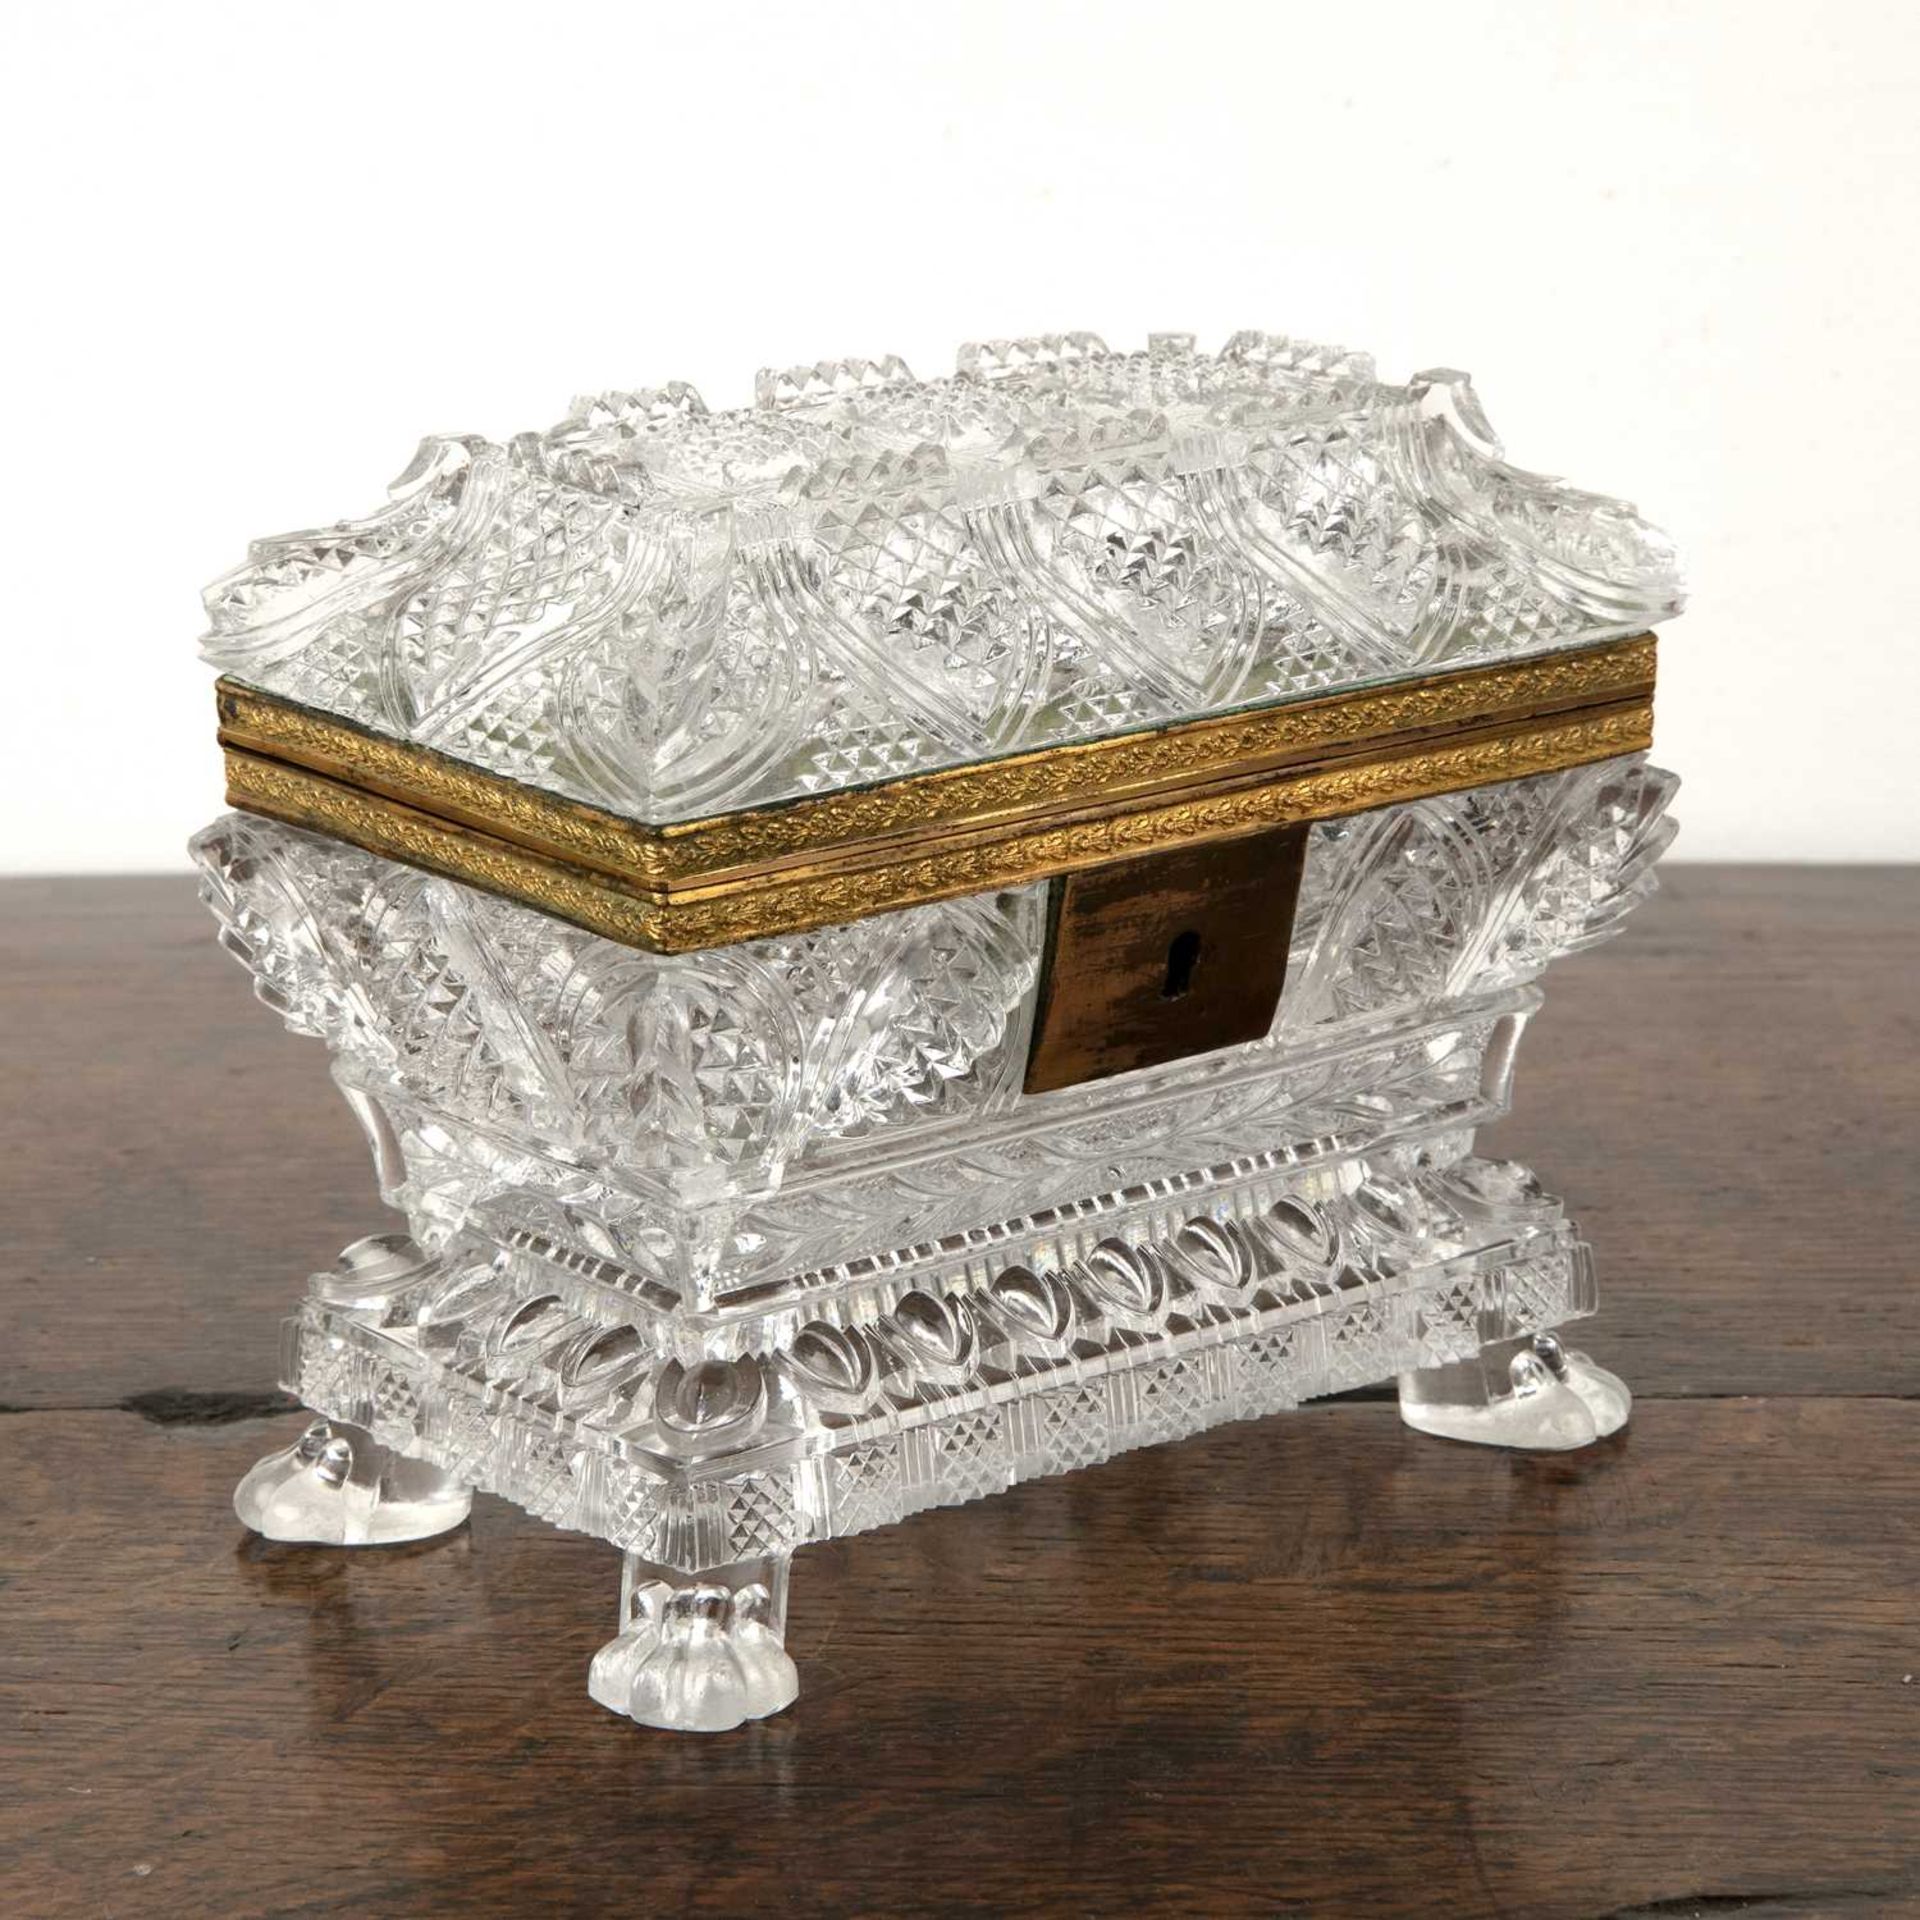 French Charles X style glass casket or coffin with gilt metal mounts on a pressed or moulded glass - Image 2 of 5